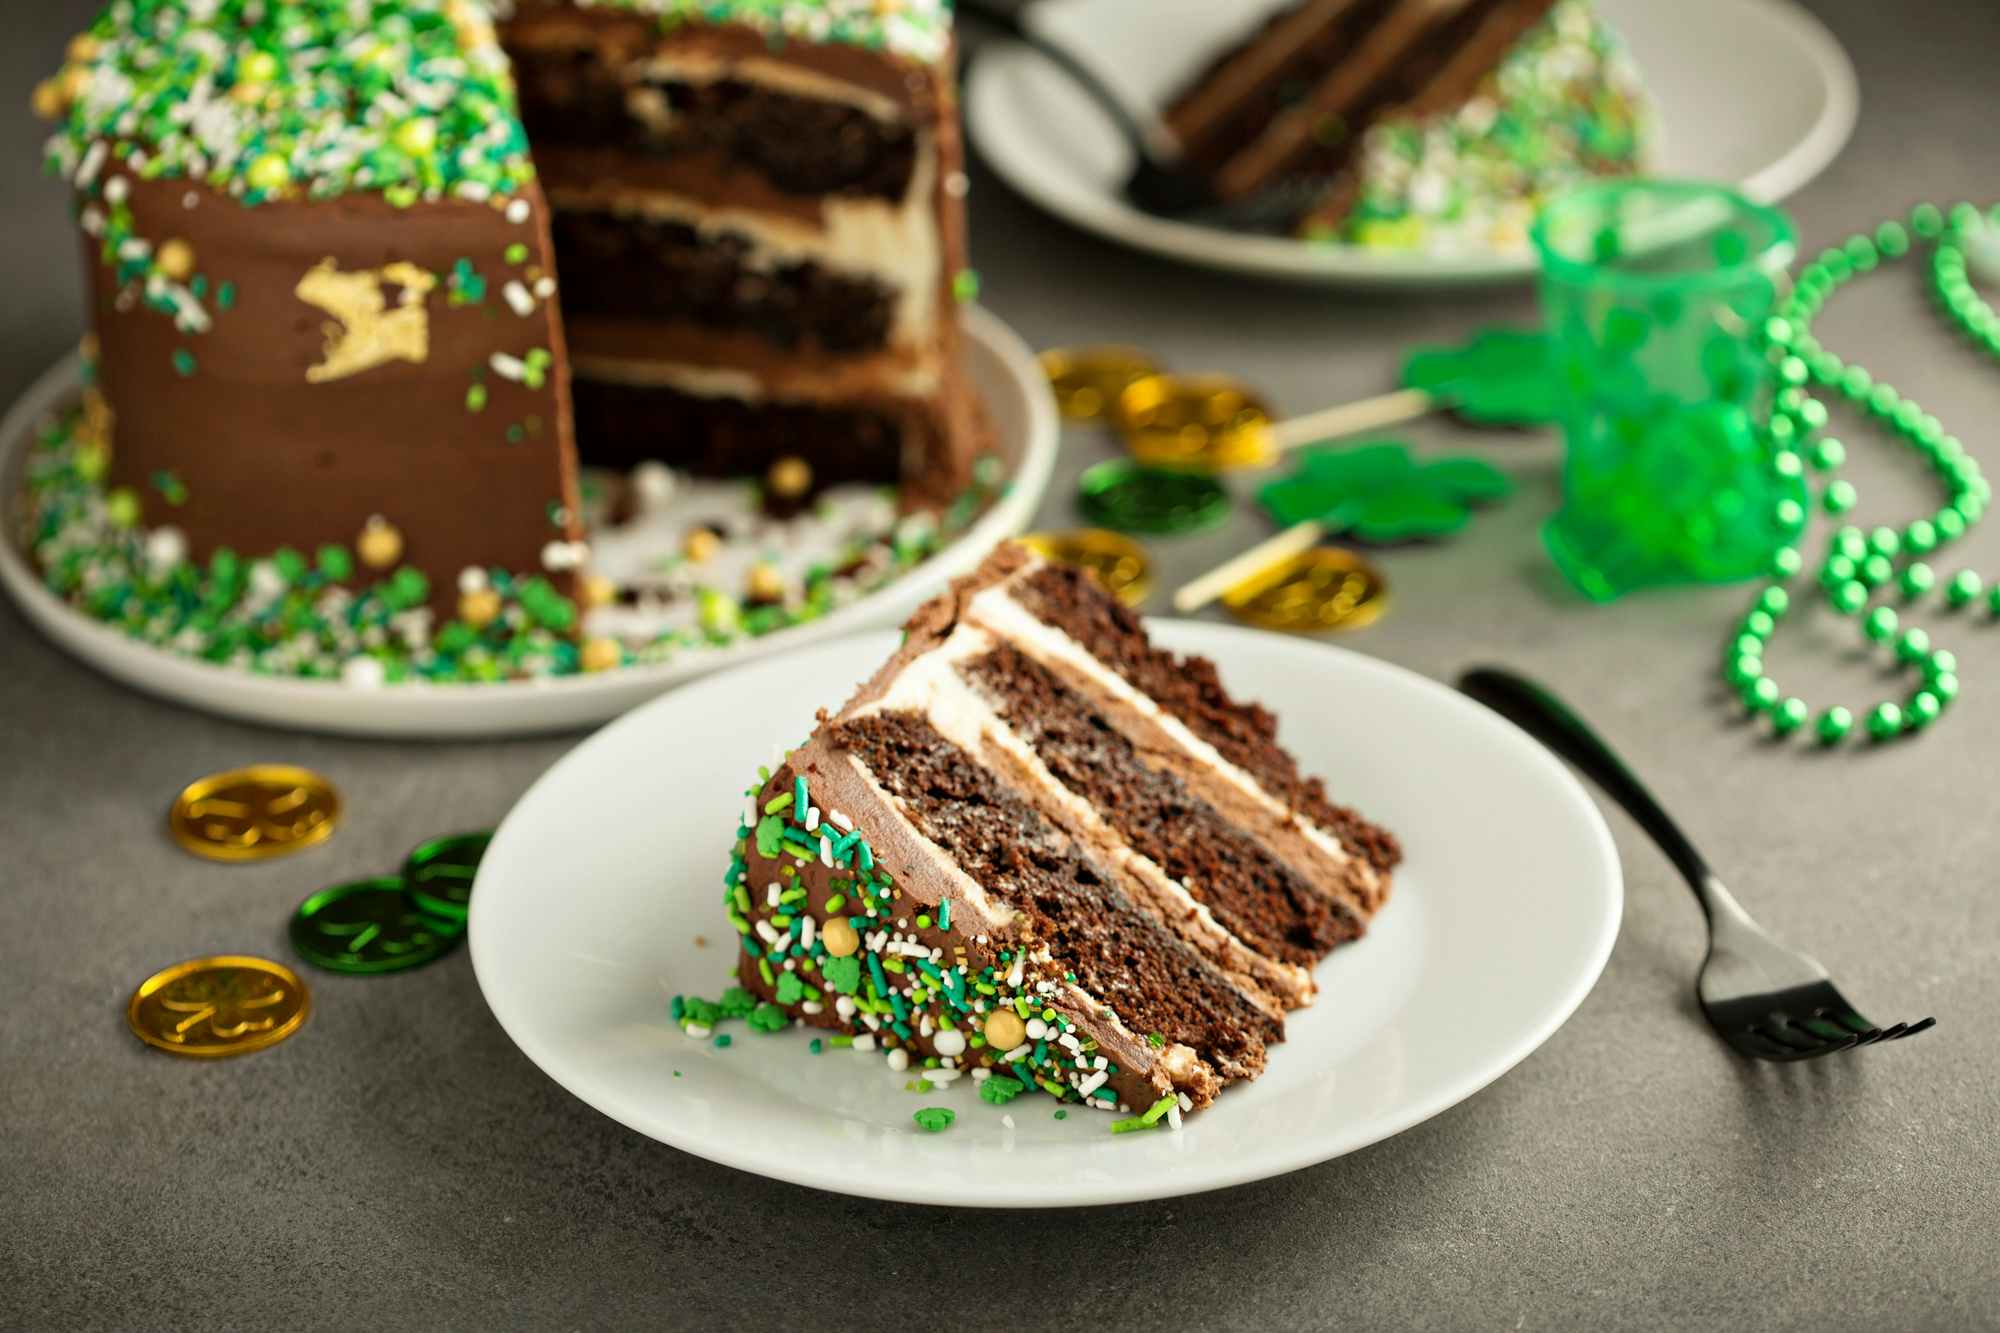 A piece of chocolate cake with green sprinkles on a plate next to the rest of the cake and some St. Patricks Day themed items